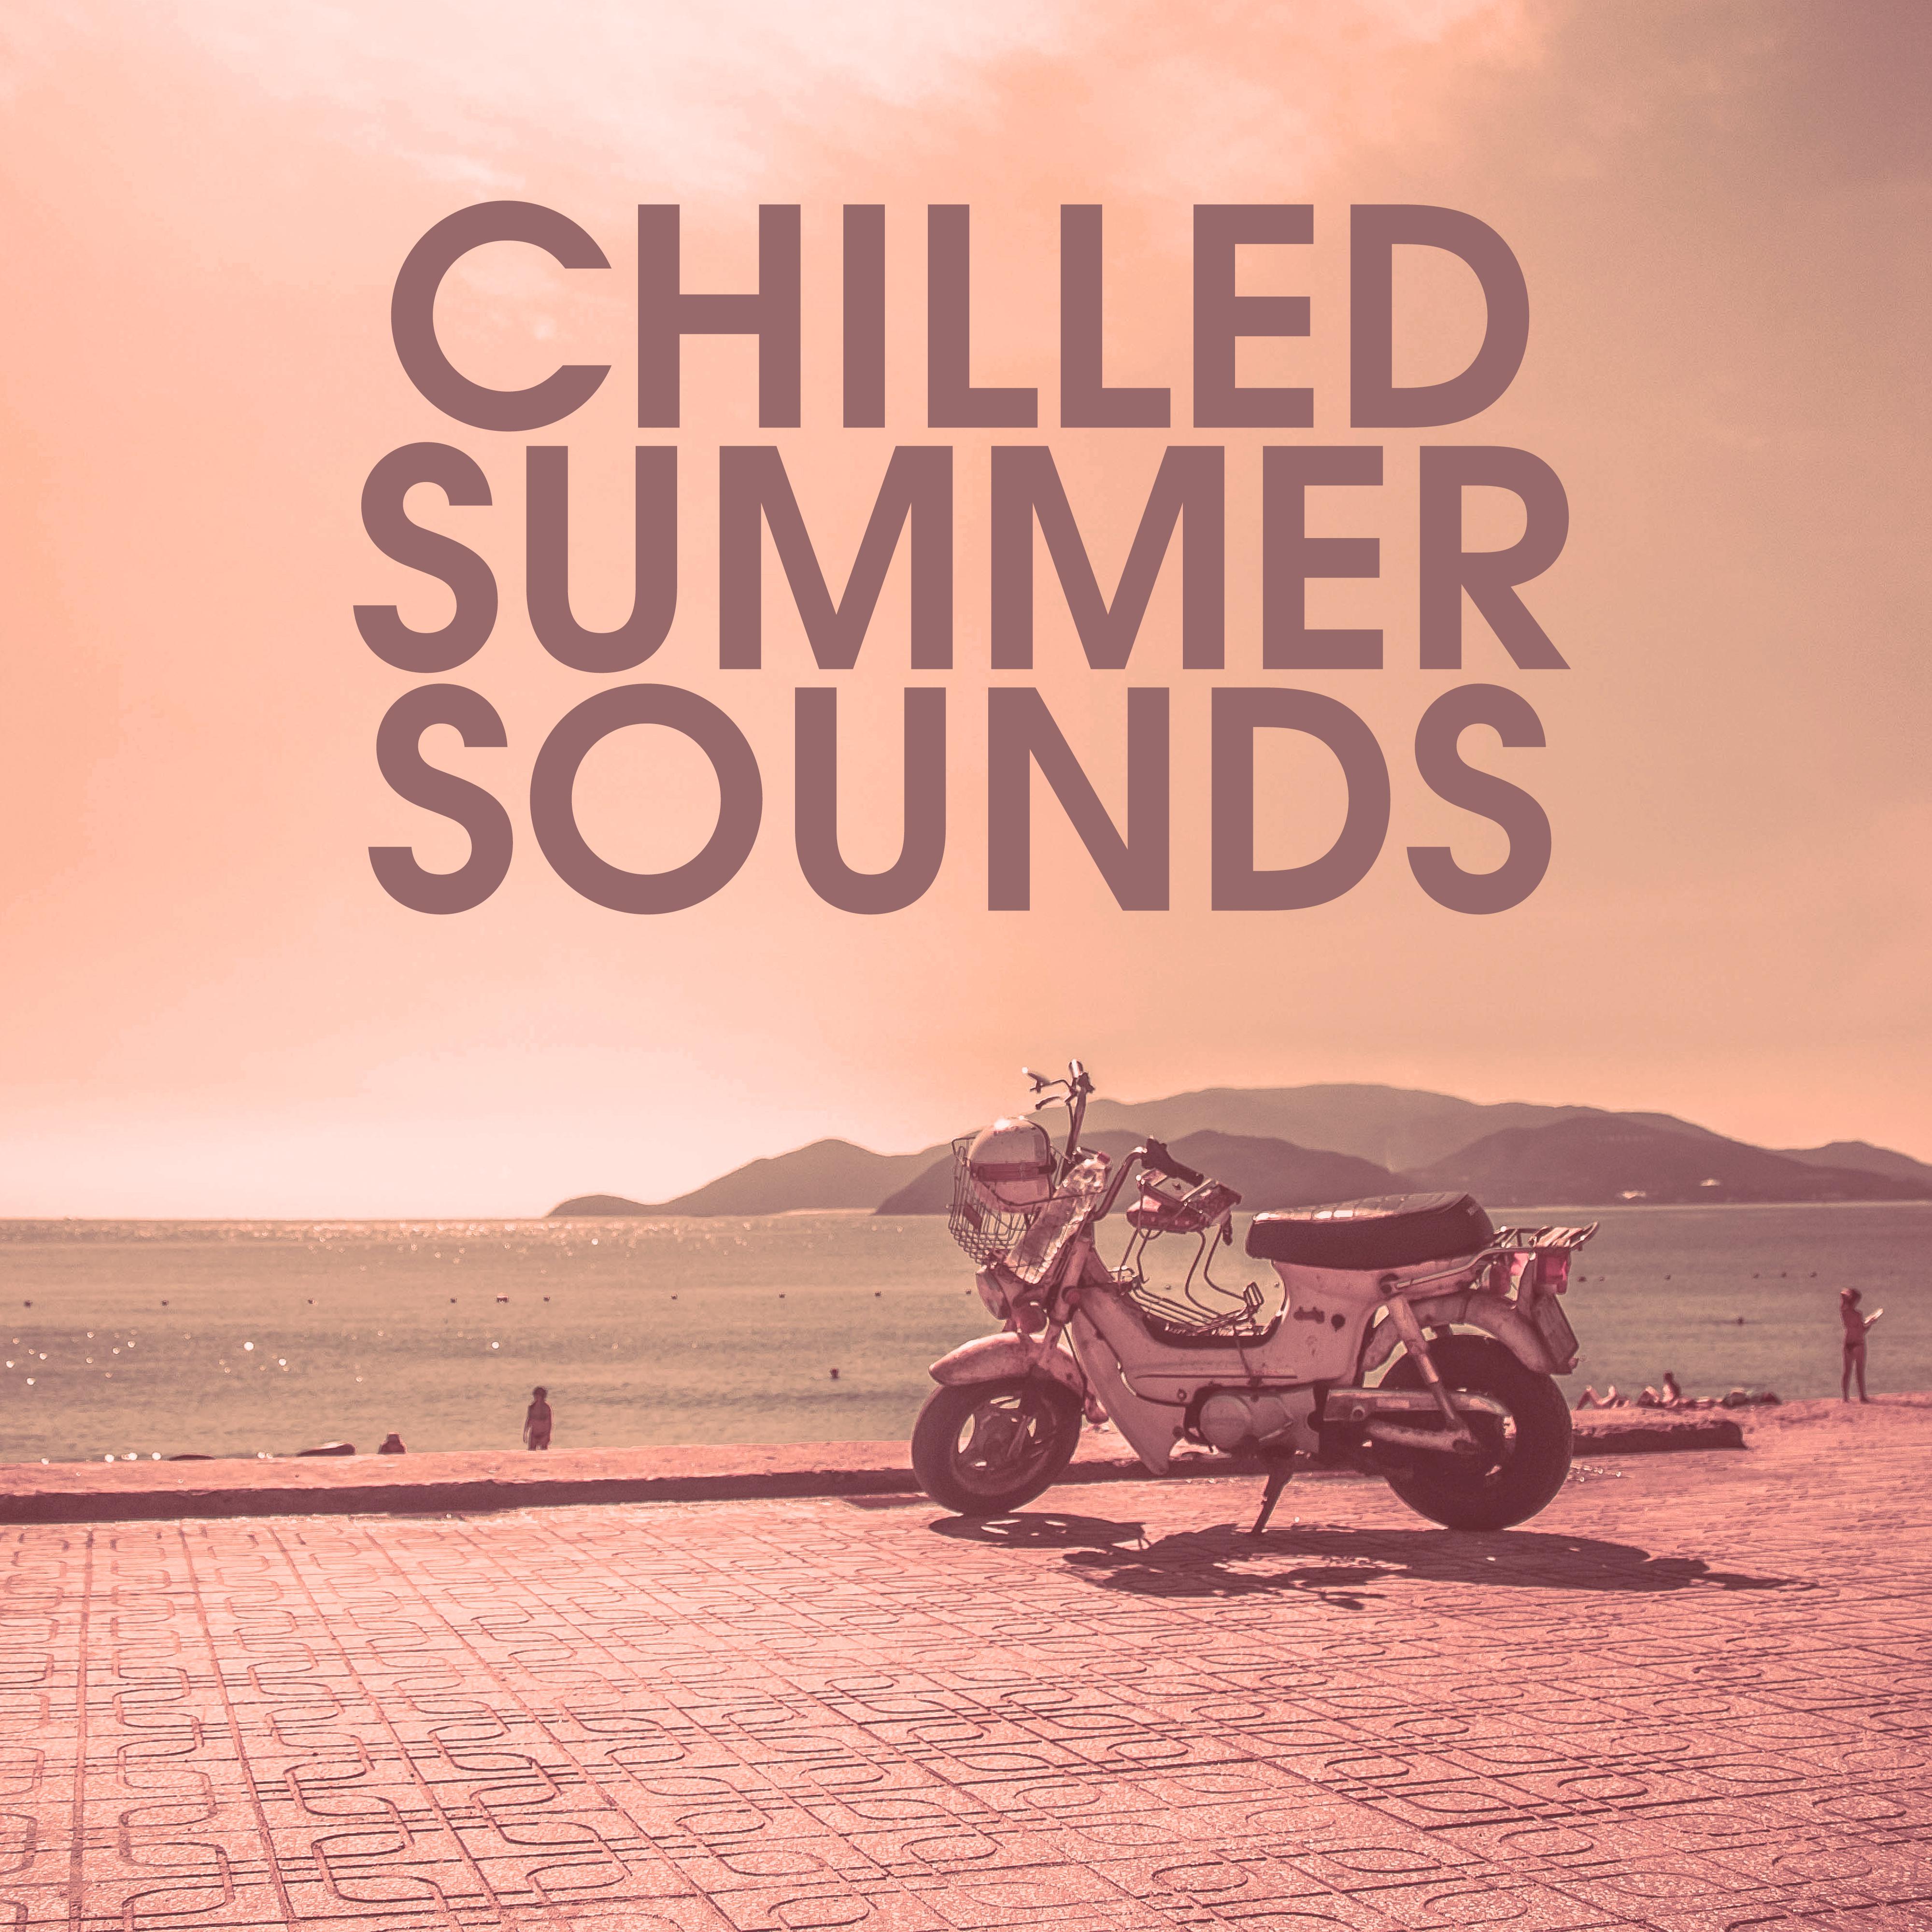 Chilled Summer Sounds  Easy Listening, Peaceful Music, Chill Out Melodies, Inner Rest